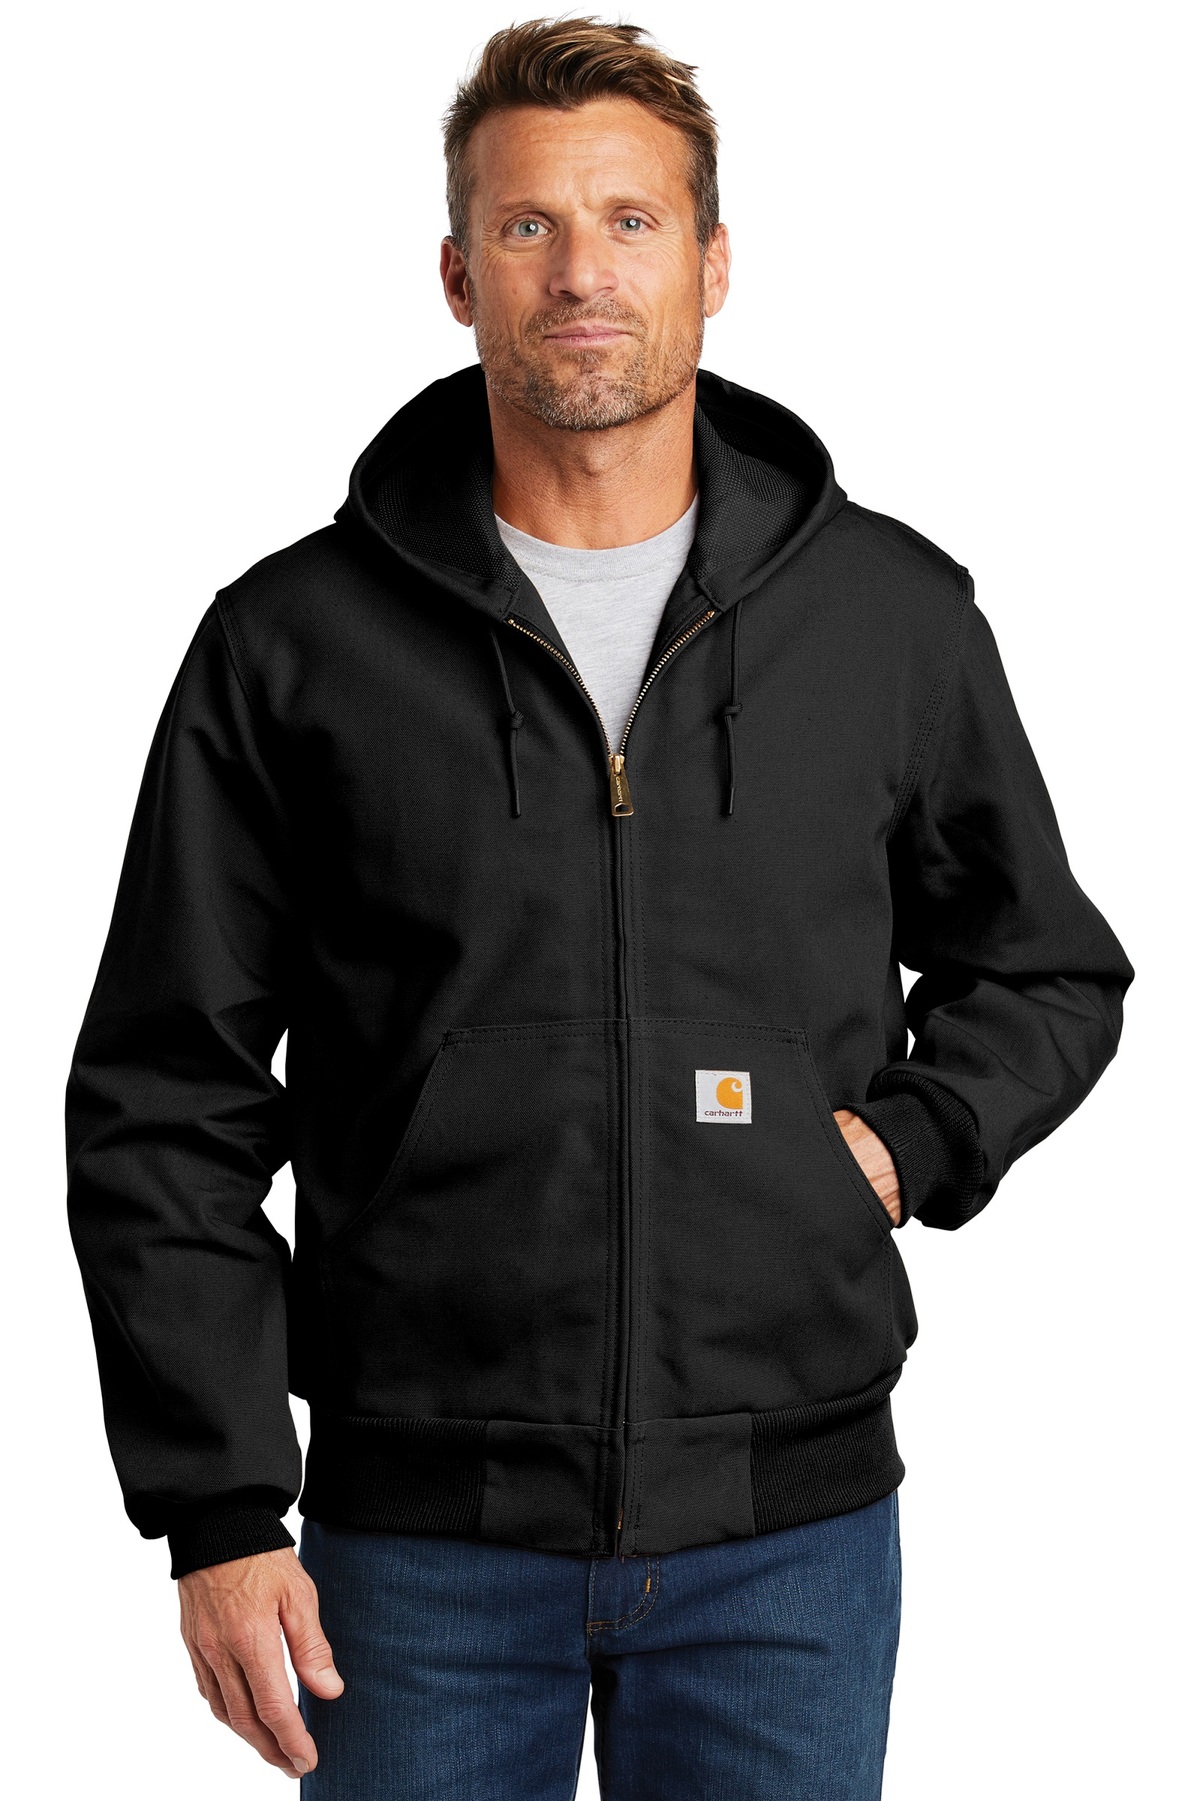 Carhartt Embroidered Men's Thermal-Lined Duck Active Jacket - Queensboro